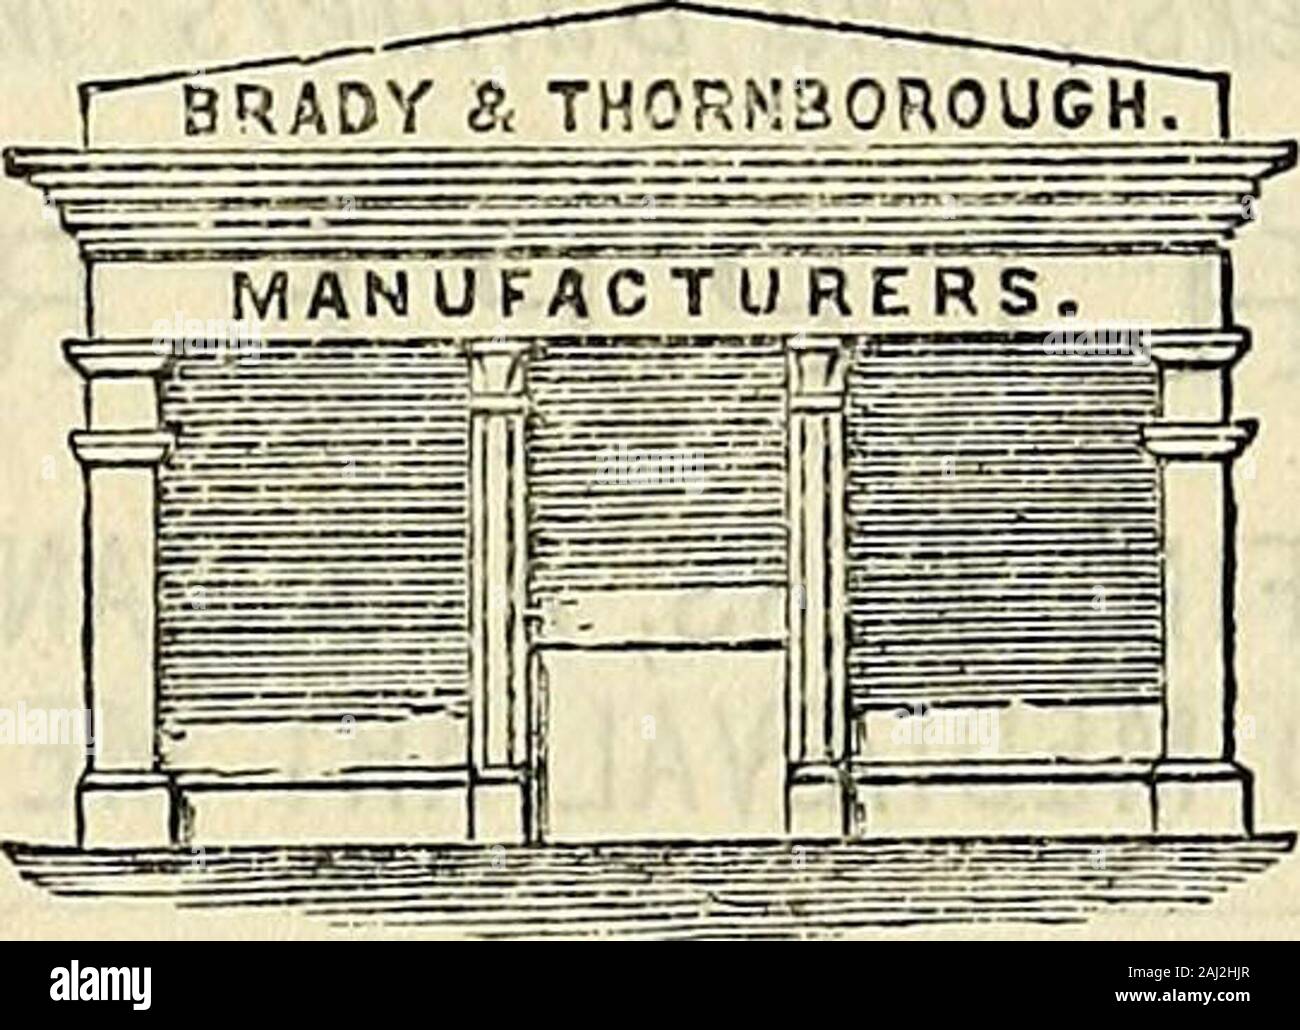 Post Office Edinburgh and Leith directory . BRADY & THORNBOROUGH, Manufacturers of Improved Revolving WOOD & lEOI SIUTTERS 6 CALTON STREET, EDINBURGH, SOLE AGENT FOR SCOTLAND. ALL GLASSES OF PANELLED SHUTTERS,WITH WEIGHTS AND CHAINS.. Estimatesand Catalogues on Brackets forSnnMnds. WORKS: CANAL STREET, GREAT ANCOATS, MANCHESTER. LONDON OFFICE: 147 QUEEN VICTORIA STREET, E.C 84 EDINBURGH A^D LEITH Stock Photo